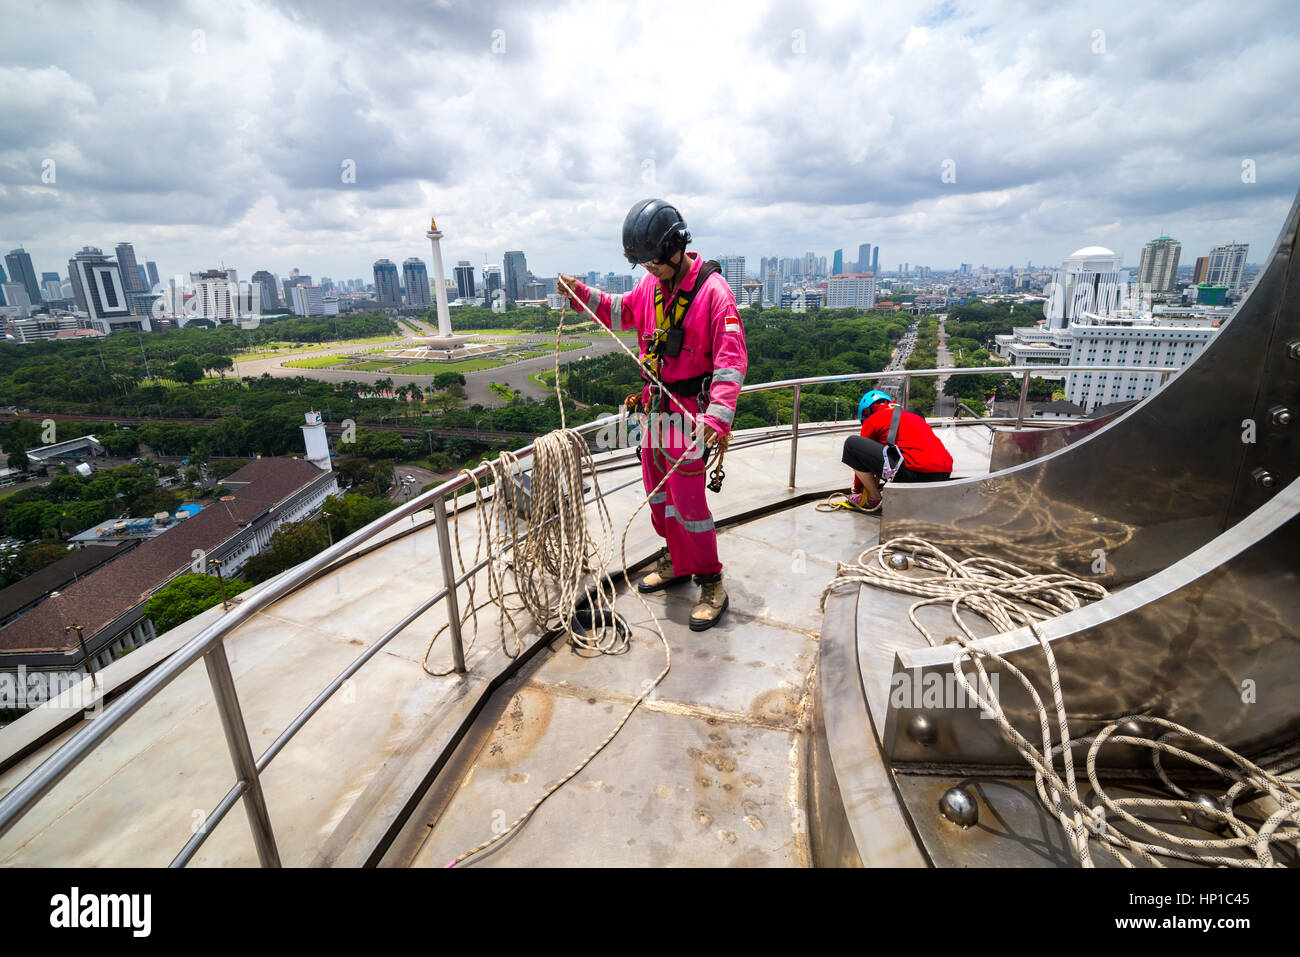 Jakarta, Indonesia. 16th of February 2017. Voluntary workers coils the ropes at the hightest standing platform of the 66.66 metres-height tower of Istiqlal Mosque in Jakarta, Indonesia. Dozens of members of the outdoor activity enthusiasts clubs, rope access companies, and outdoor adventure service organization, gather voluntarily to clean up the largest mosque in Southeast Asia as a symbol of unity and tolerance. Credit: Reynold Sumayku/Alamy Live News Stock Photo